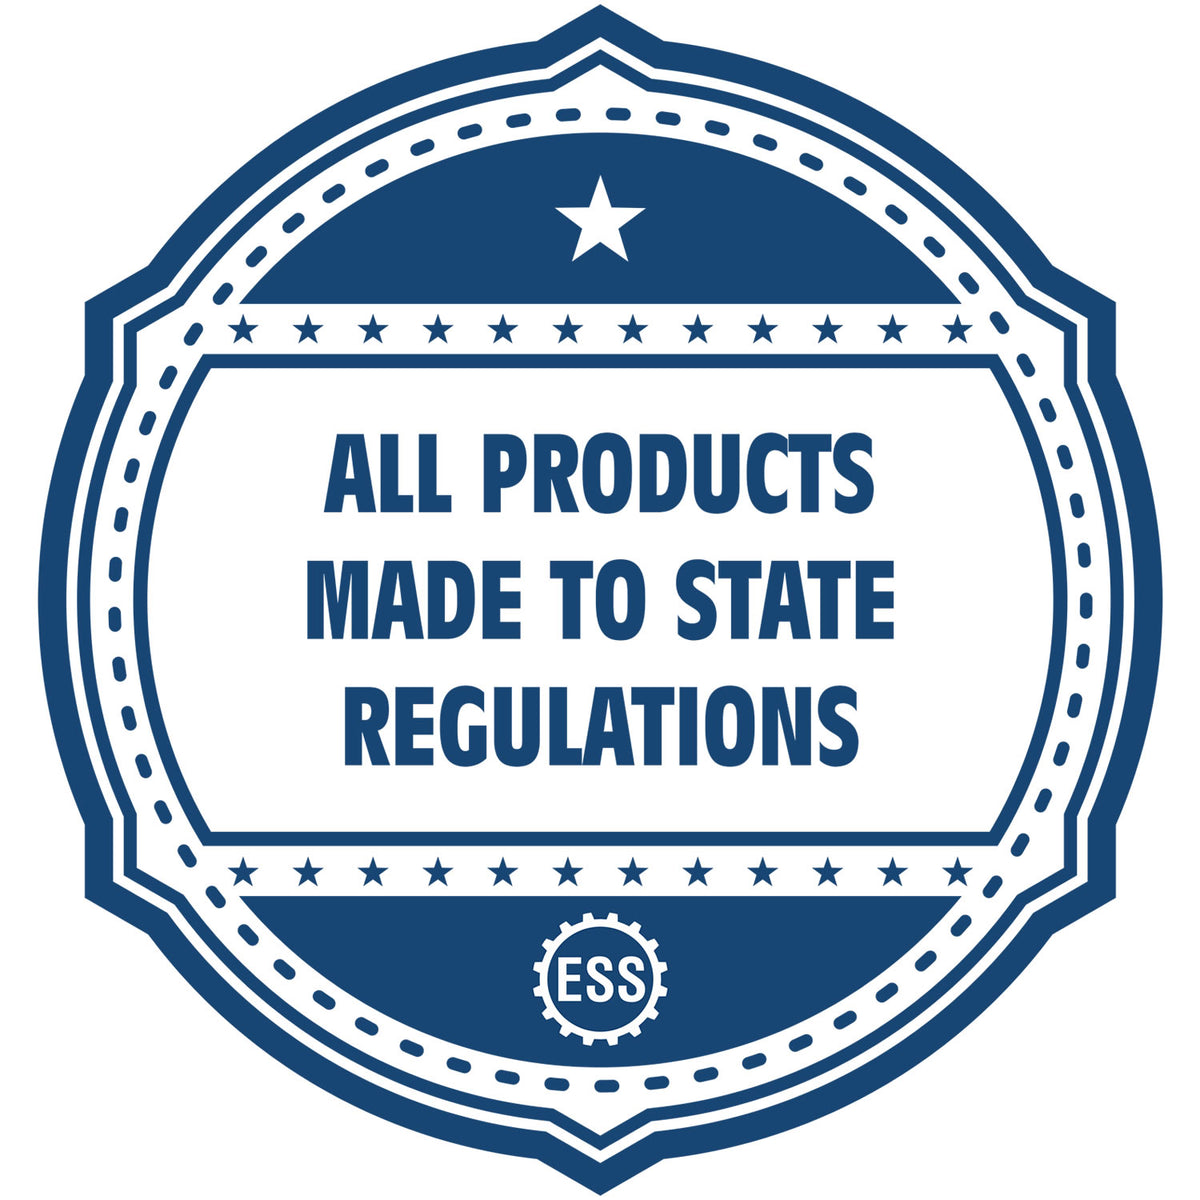 An icon or badge element for the State of Kansas Extended Long Reach Engineer Seal showing that this product is made in compliance with state regulations.